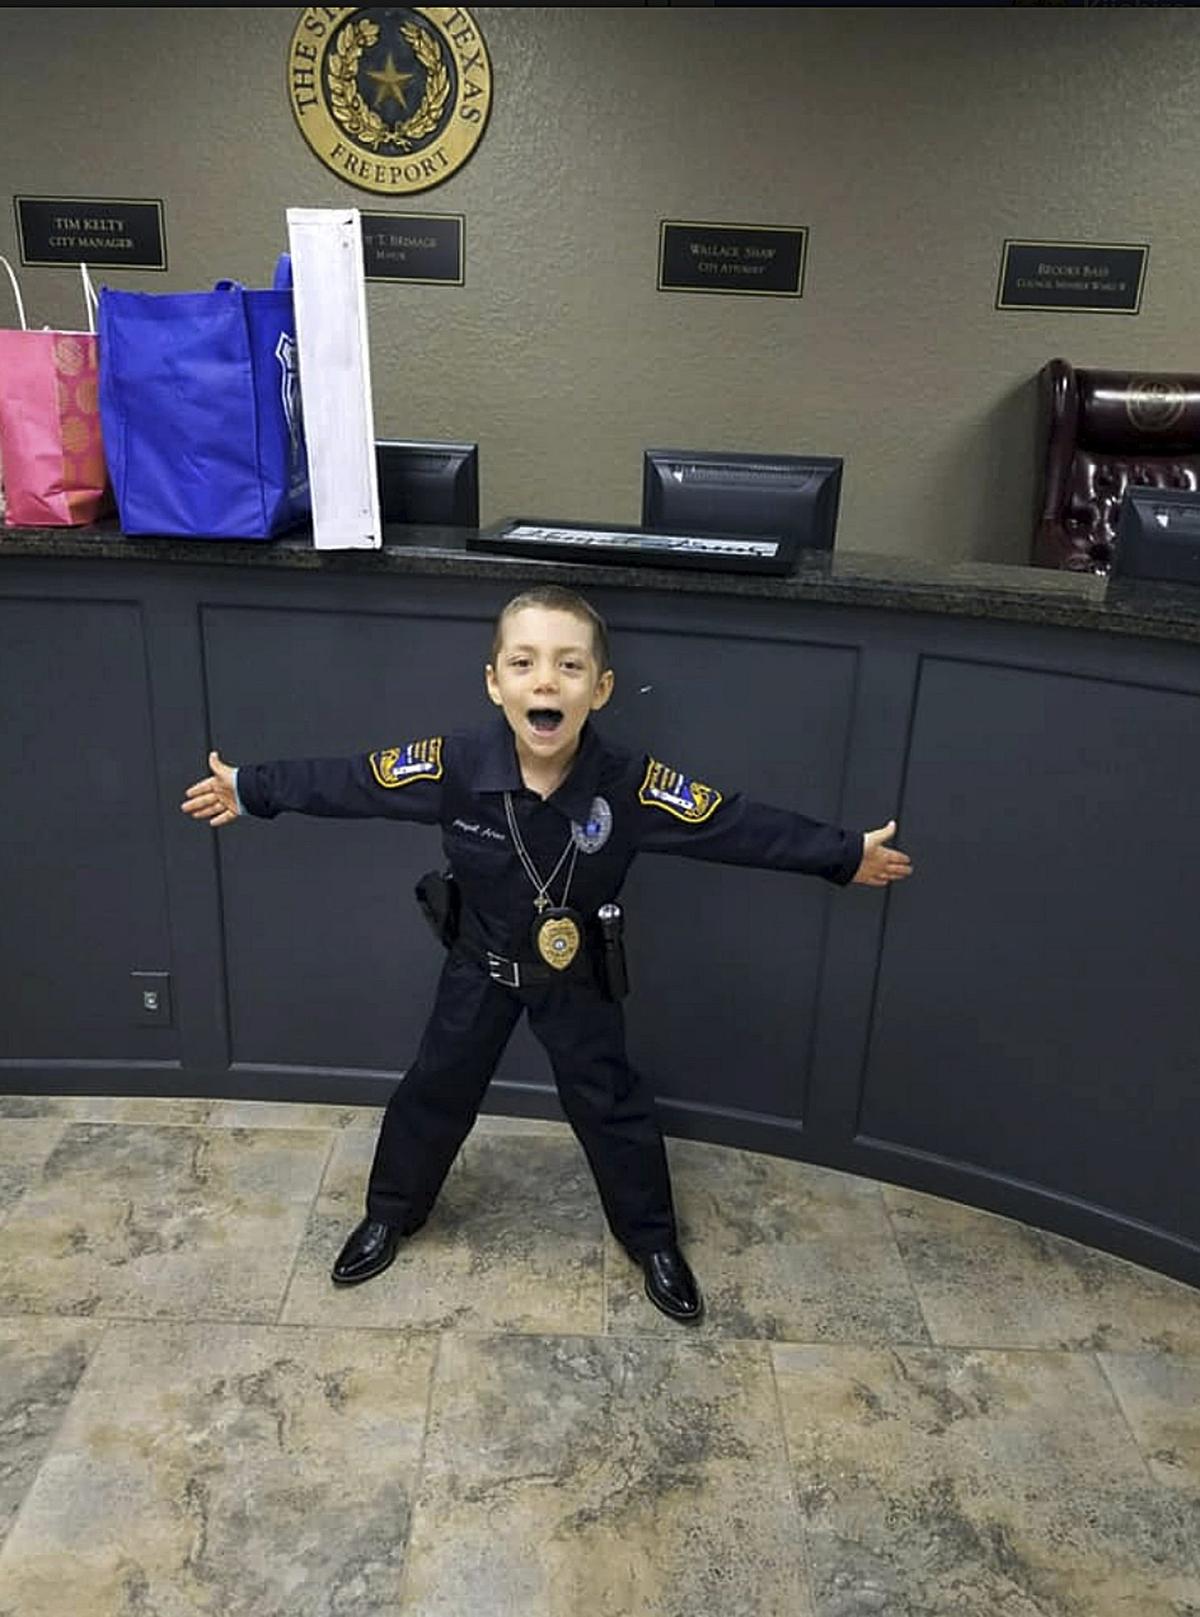 In this Feb. 7, 2019 photo provided by Freeport Police Department, 6-year-old Abigail Arias, who is battling cancer, poses for a picture after being sworn in as a Texas police officer by Freeport Police Chief Ray Garivey in Freeport, Texas. (Freeport Police Department via AP)